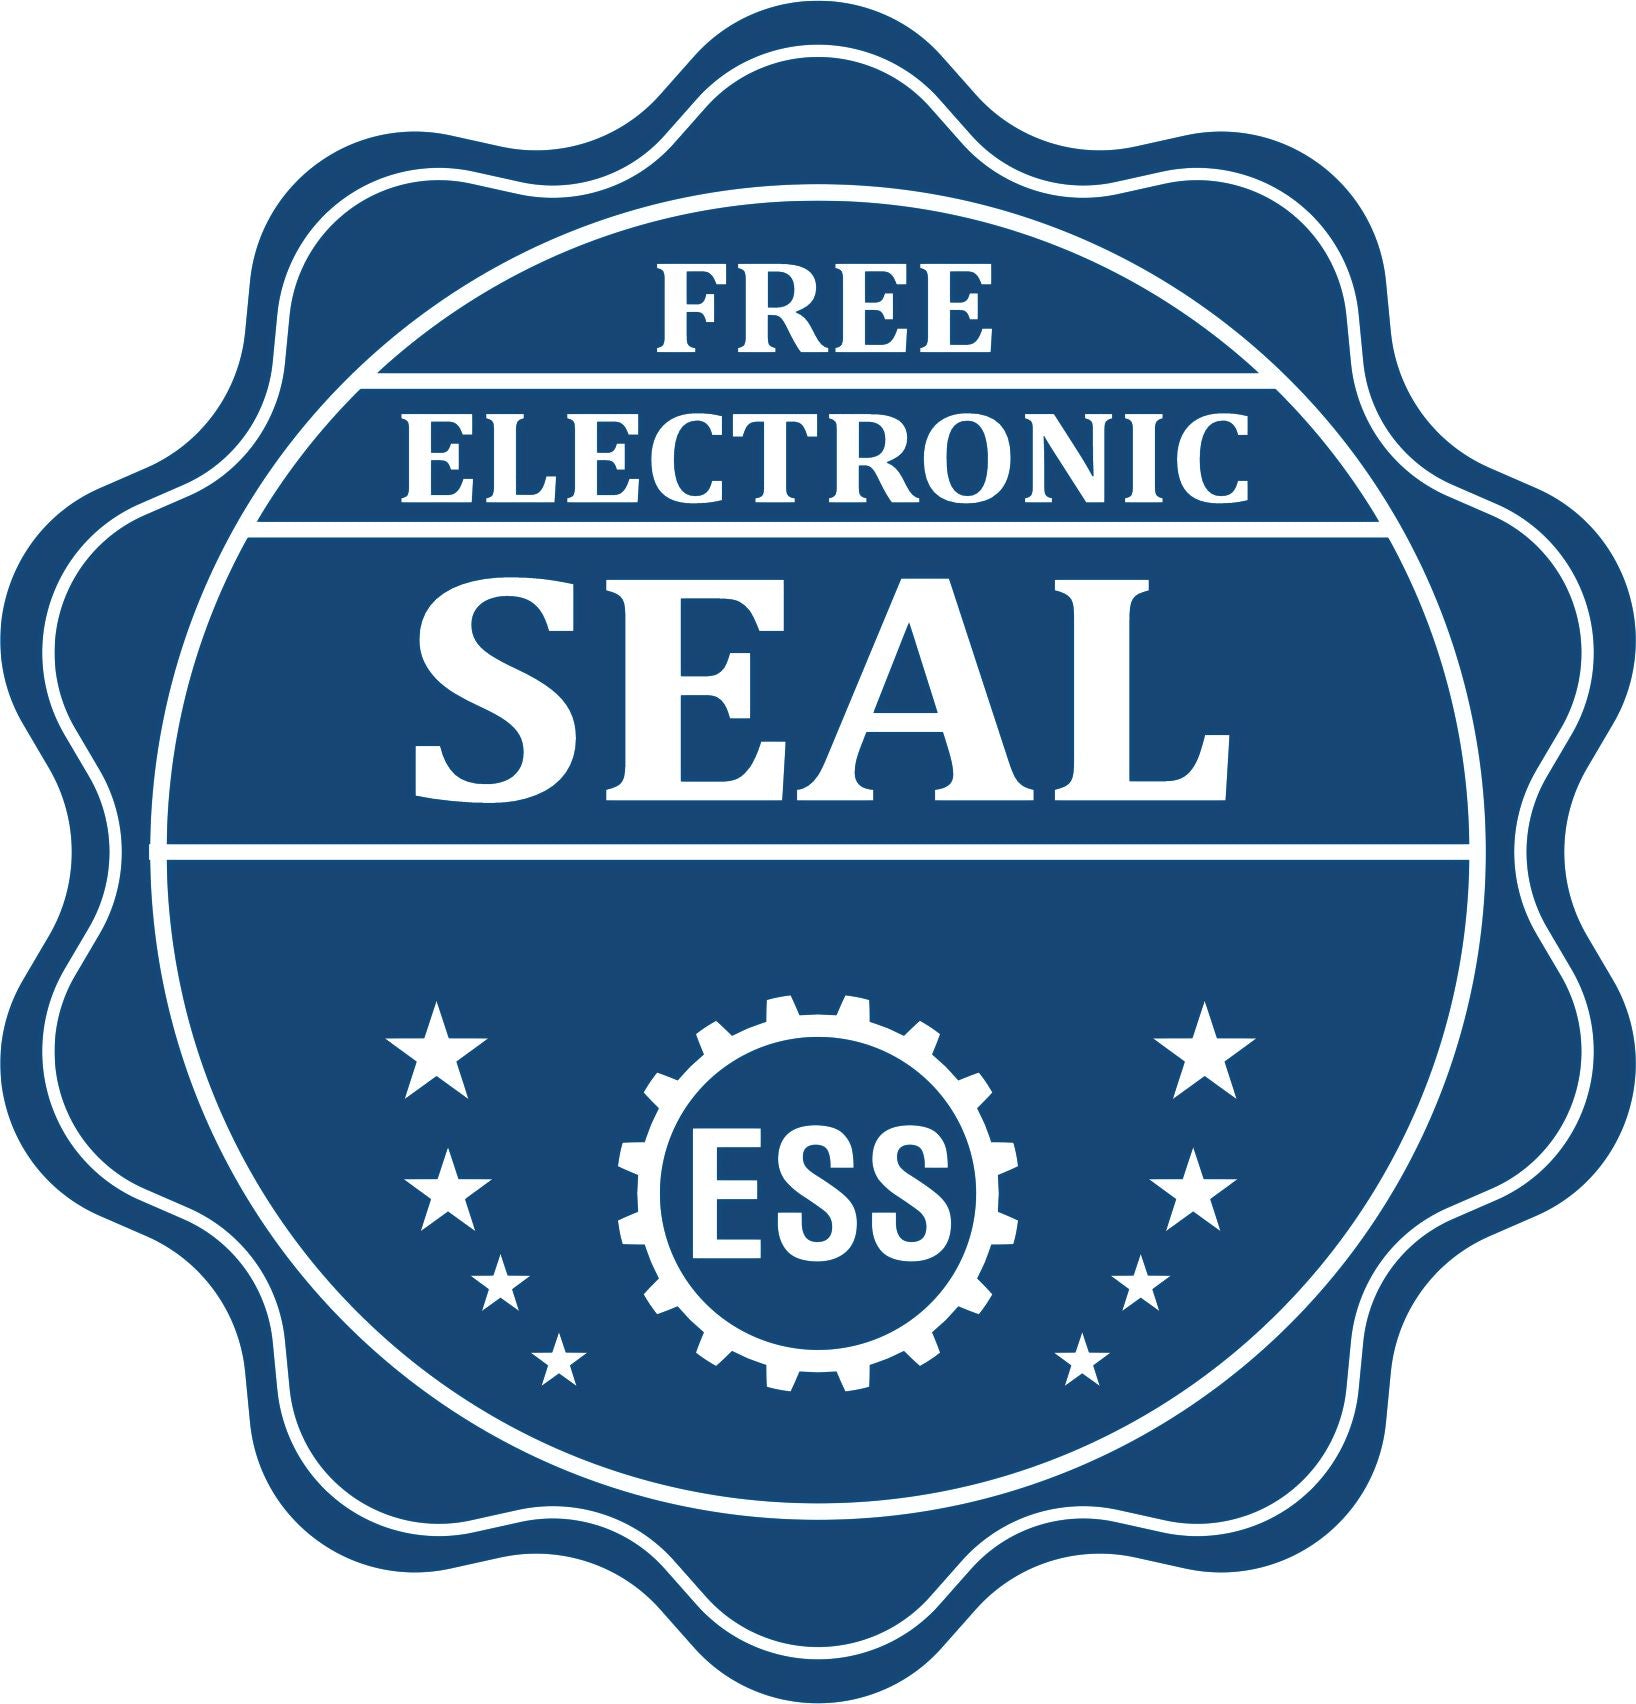 A badge showing a free electronic seal for the Super Slim New Mexico Notary Public Stamp with stars and the ESS gear on the emblem.